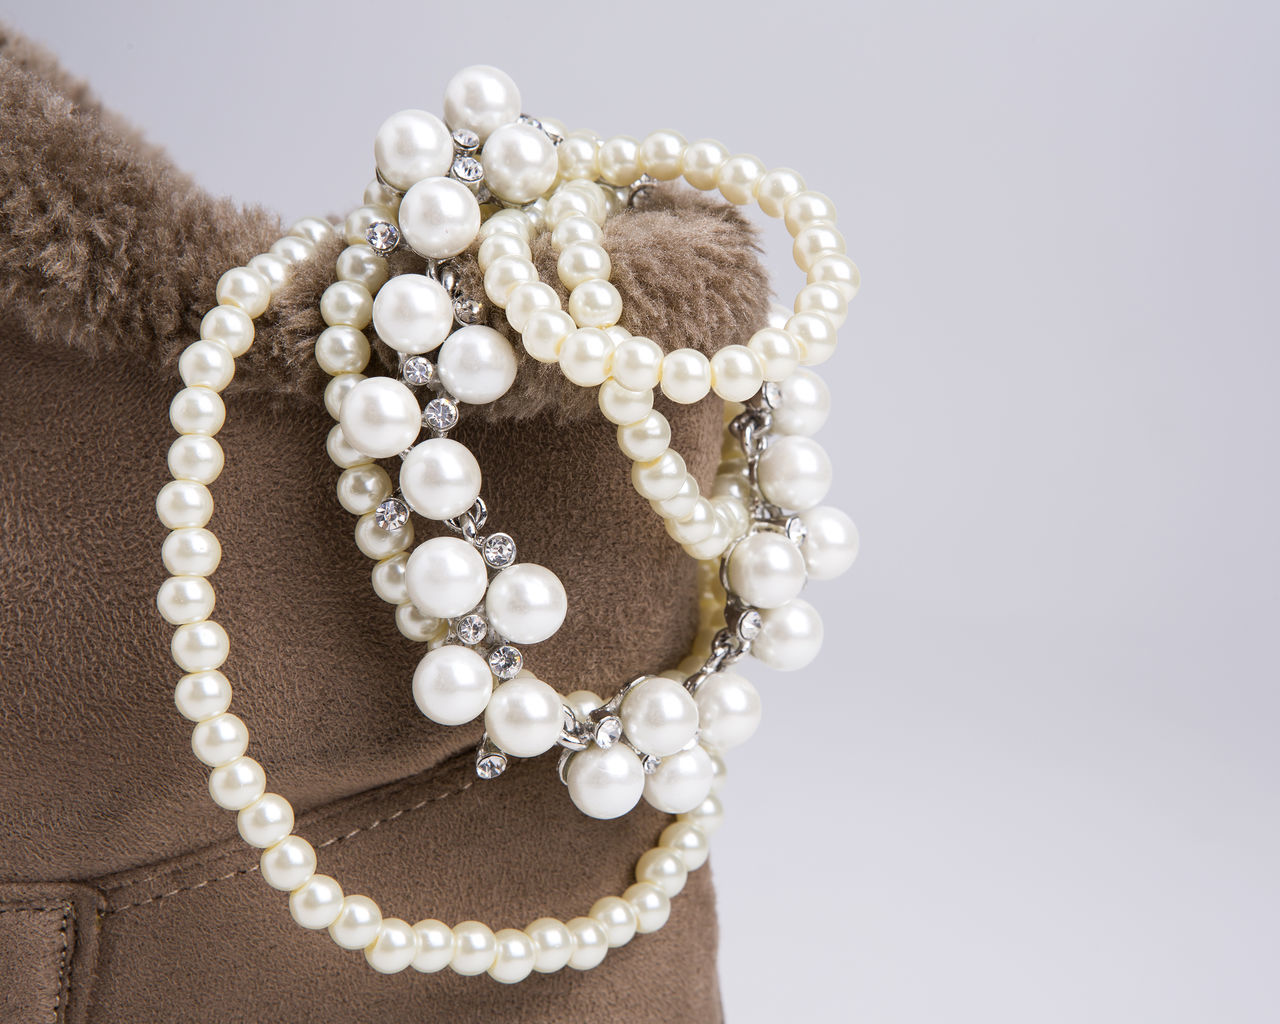 jewelry, necklace, luxury, wealth, pearl, pearl jewelry, fashion, studio shot, elegance, jewellery, personal accessory, indoors, close-up, chain, gemstone, diamond, bead, no people, glamour, bracelet, fashion accessory, white